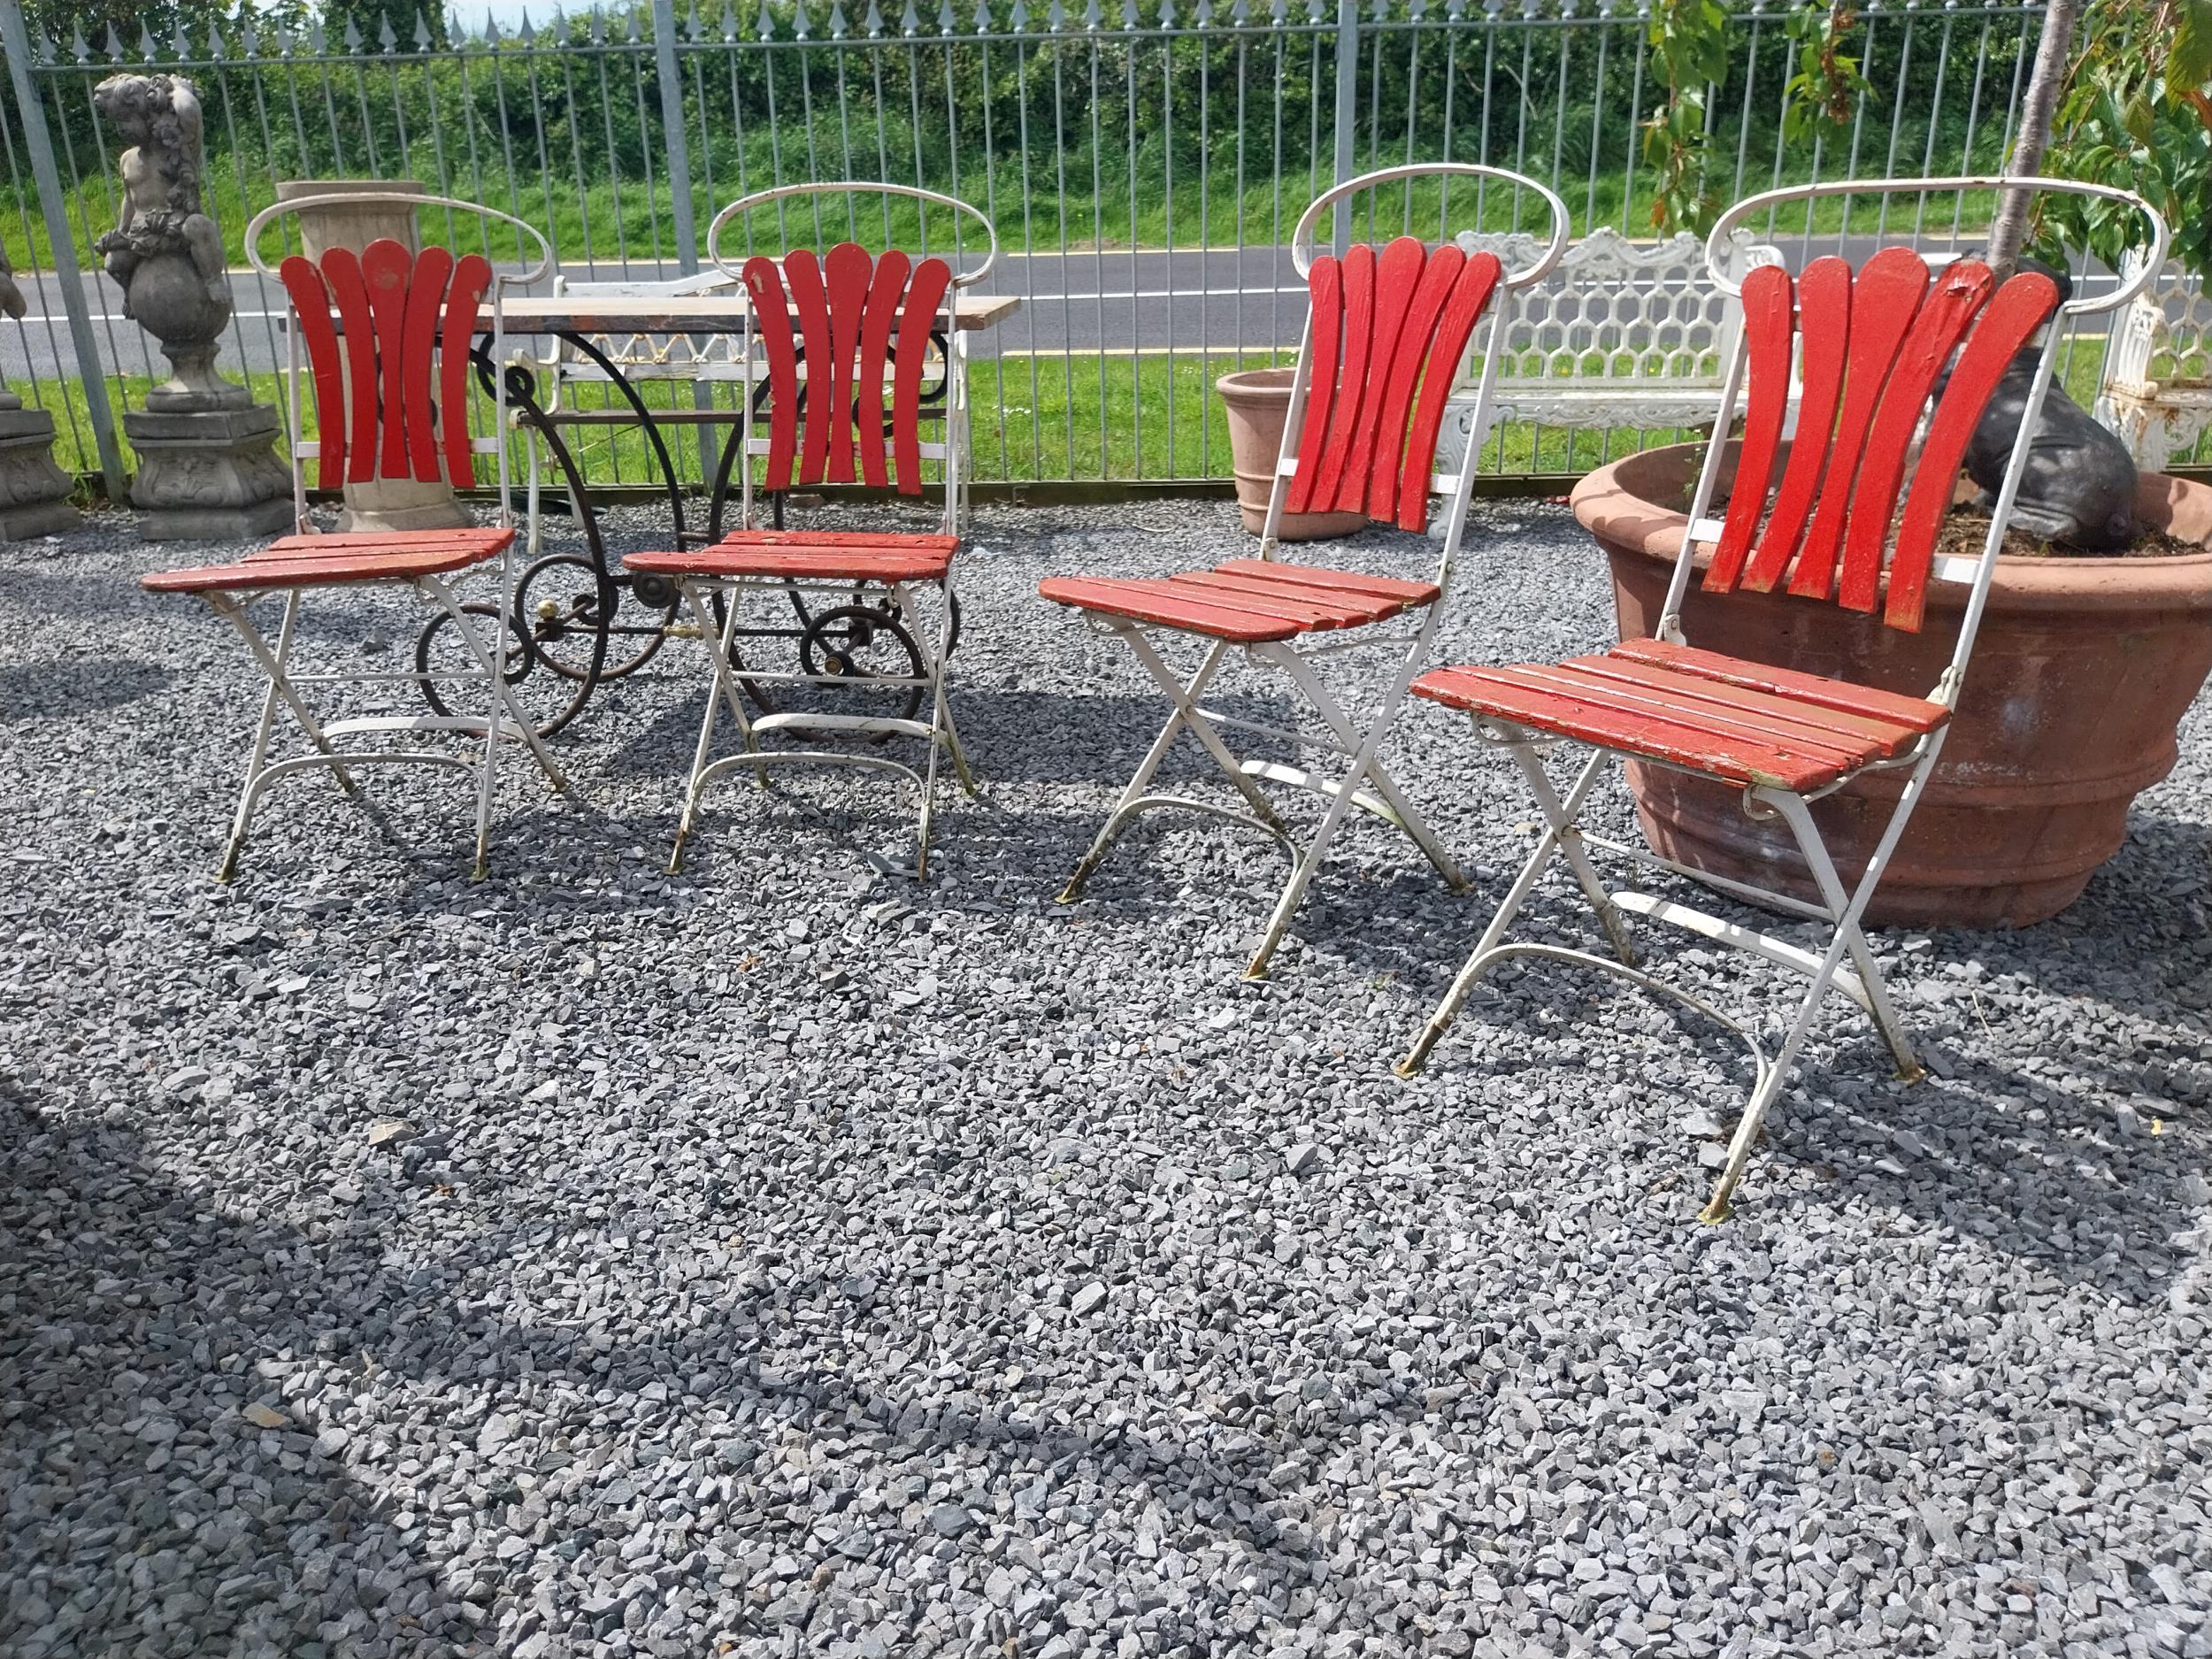 Set of four early 20th C. wrought iron folding garden chairs with wooden slats {90 cm H x 44 cm W